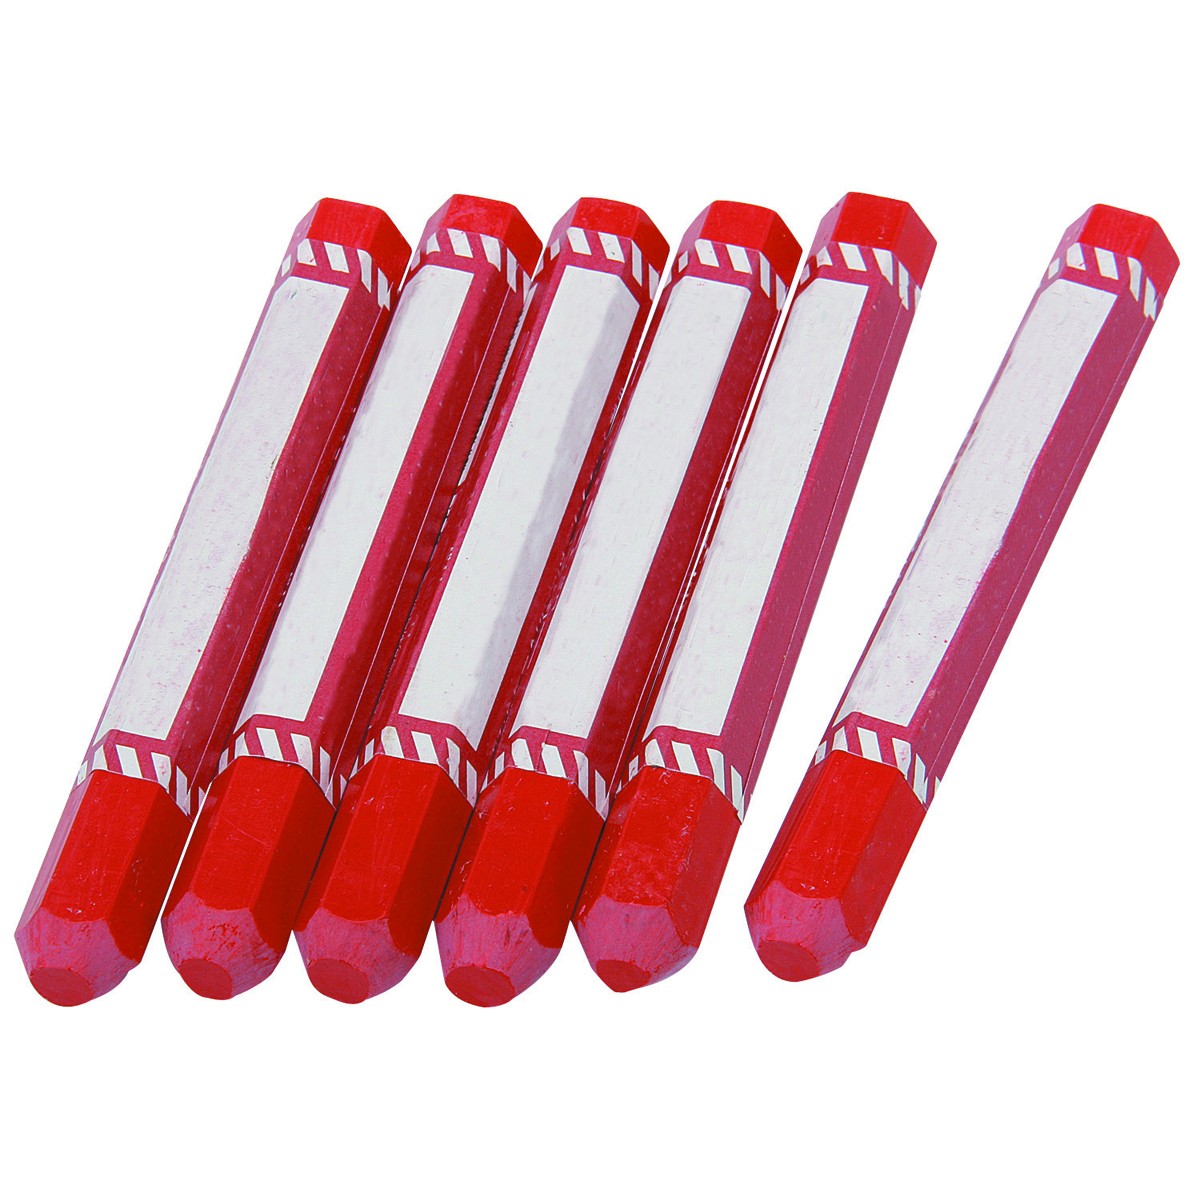 New   Pittsburgh  6 Red Wax Marking Crayons